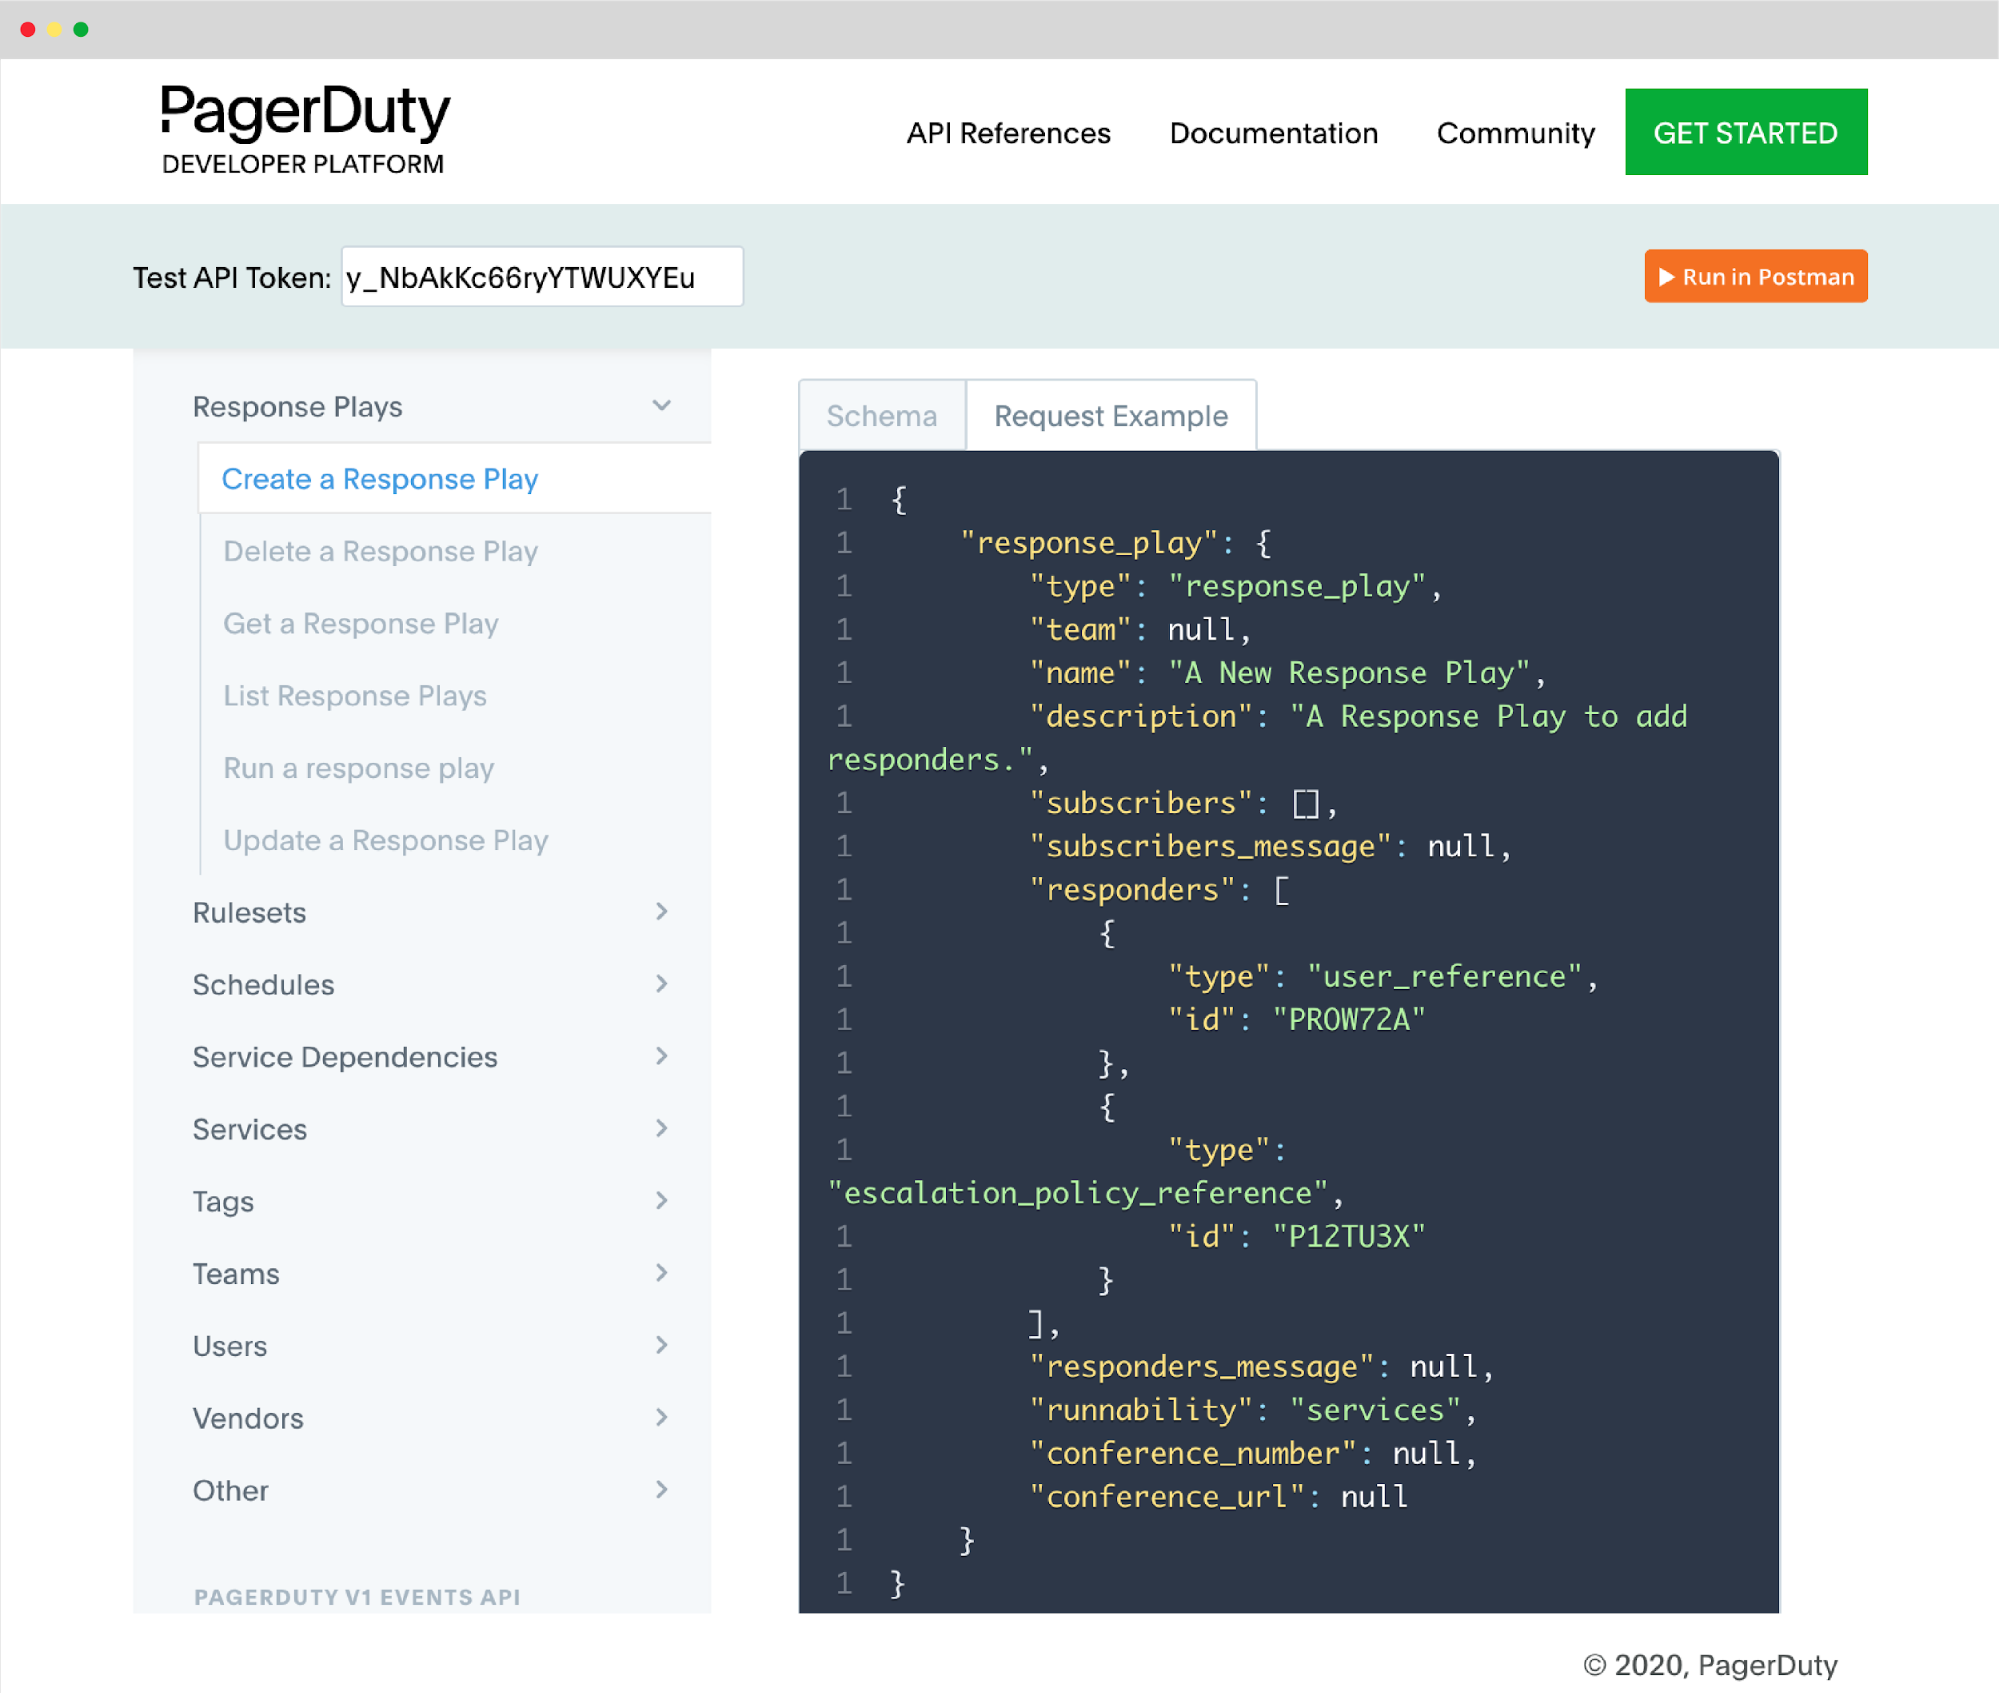 pagerduty-work-where-you-are